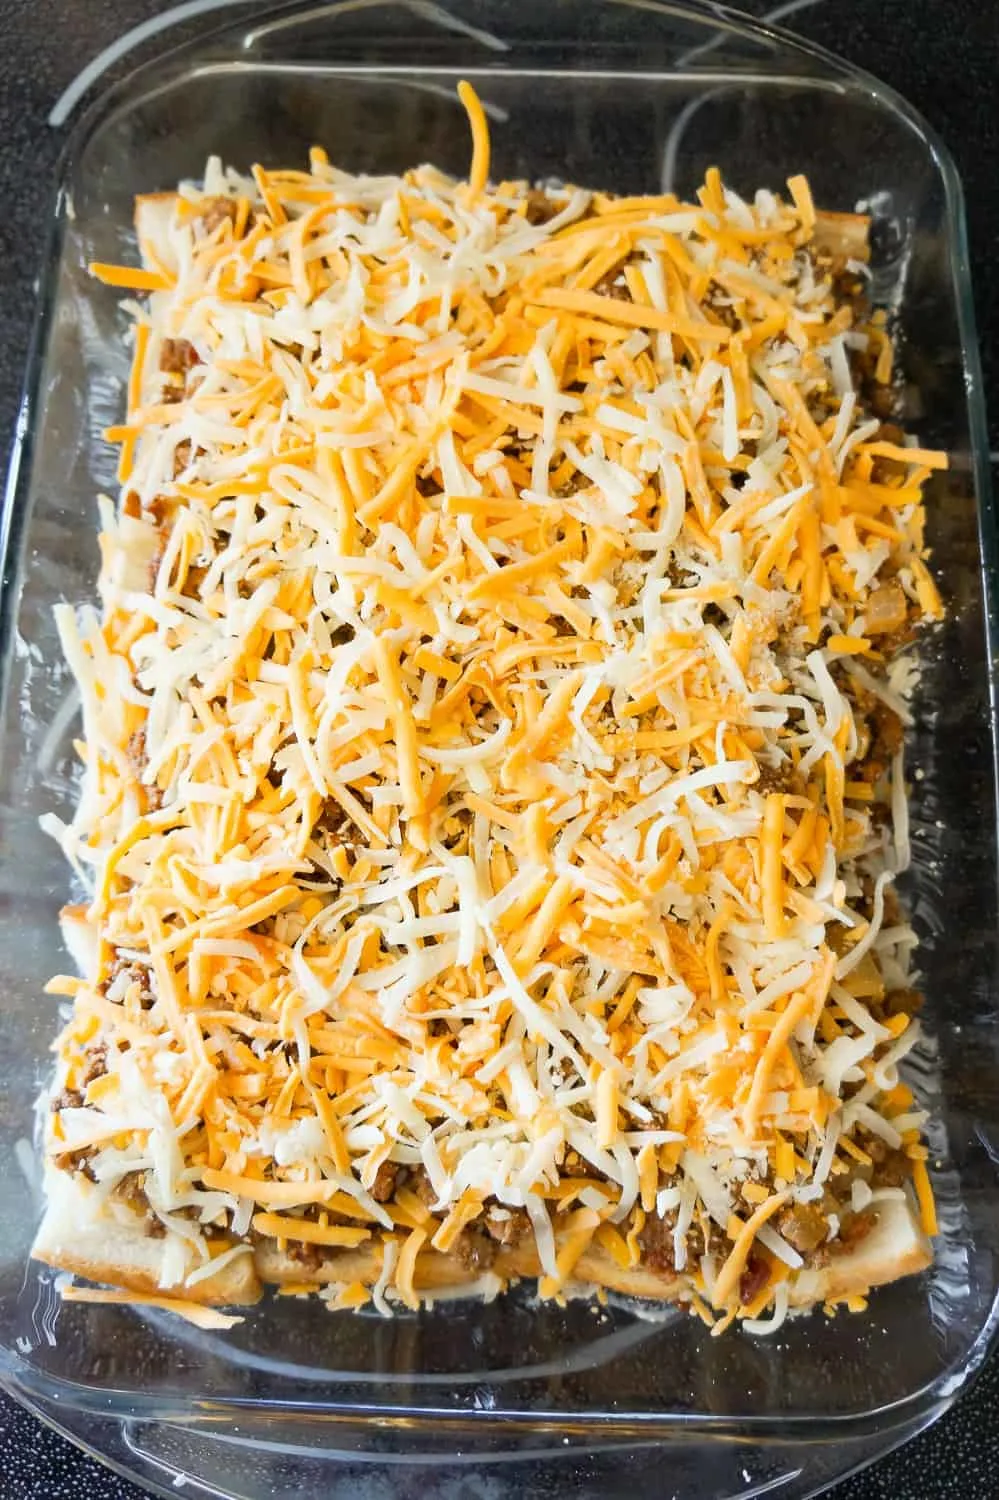 shredded mozzarella and cheddar on top of ground beef mixture in a baking dish